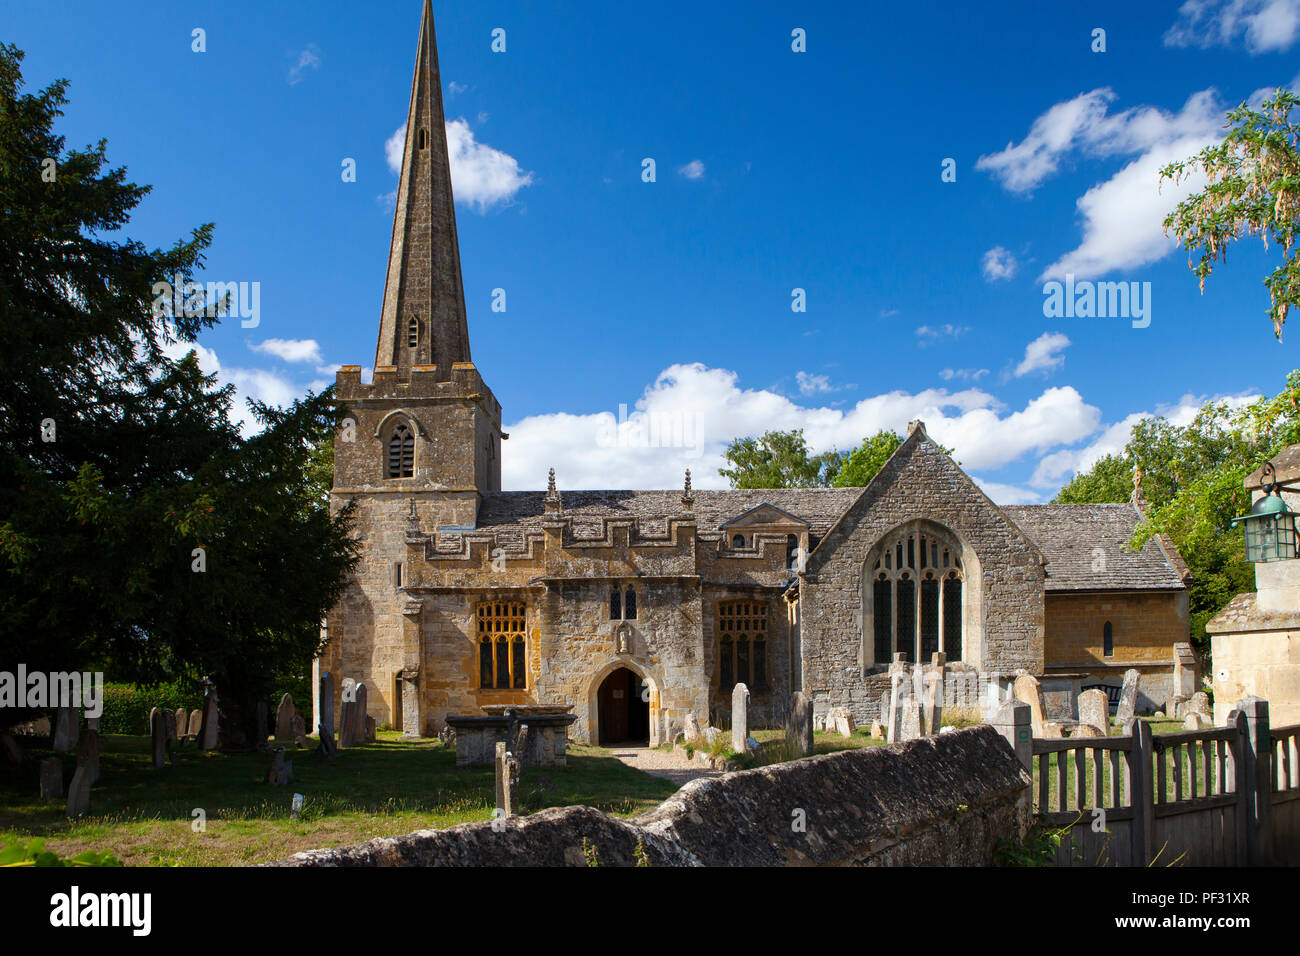 Stanton, UK - 8th August 2018: The Church of St Michael and All Angels in Stanton in the Cotswold district of Gloucestershire.The village is built alm Stock Photo